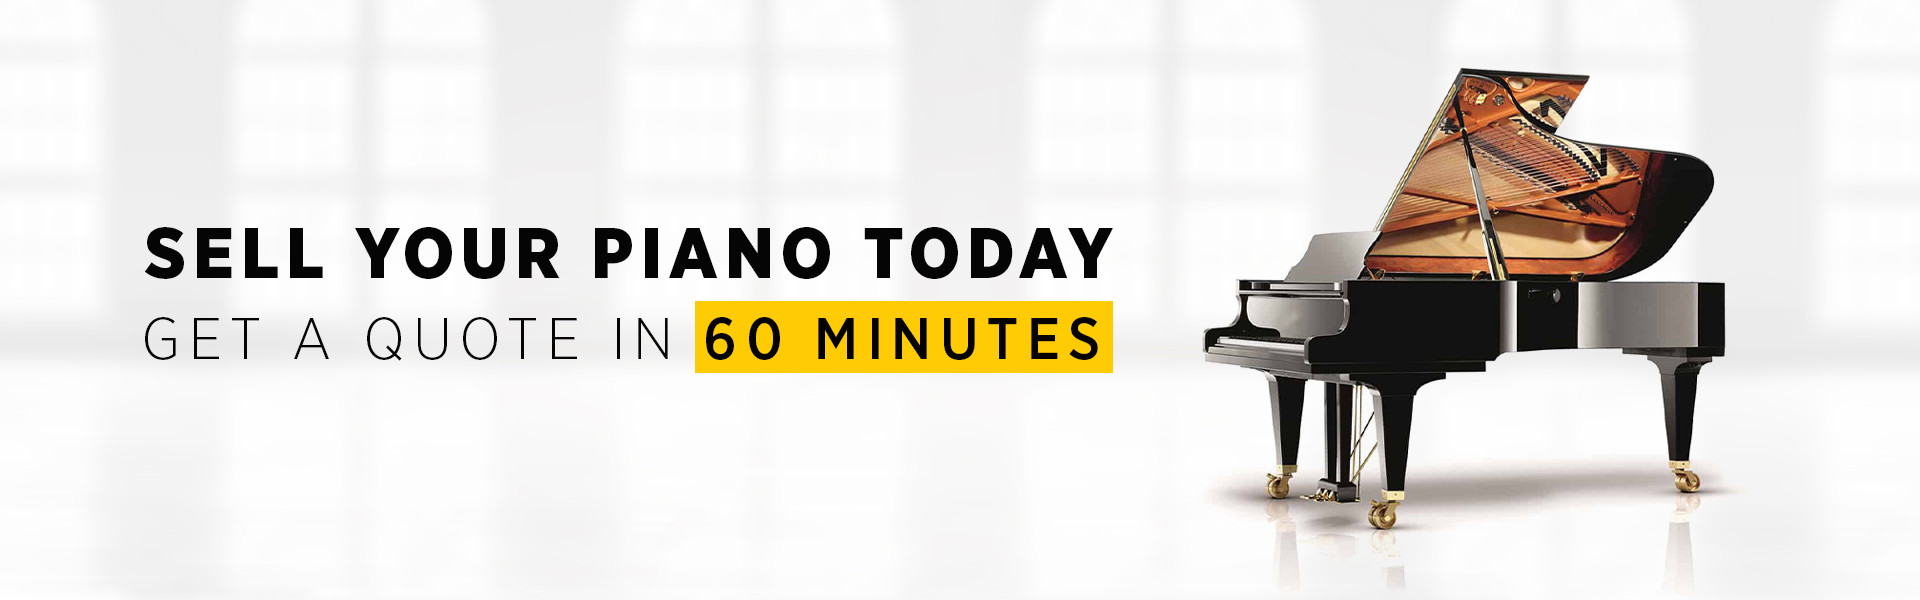 sell your piano today -- Get a quote in 60 minutes